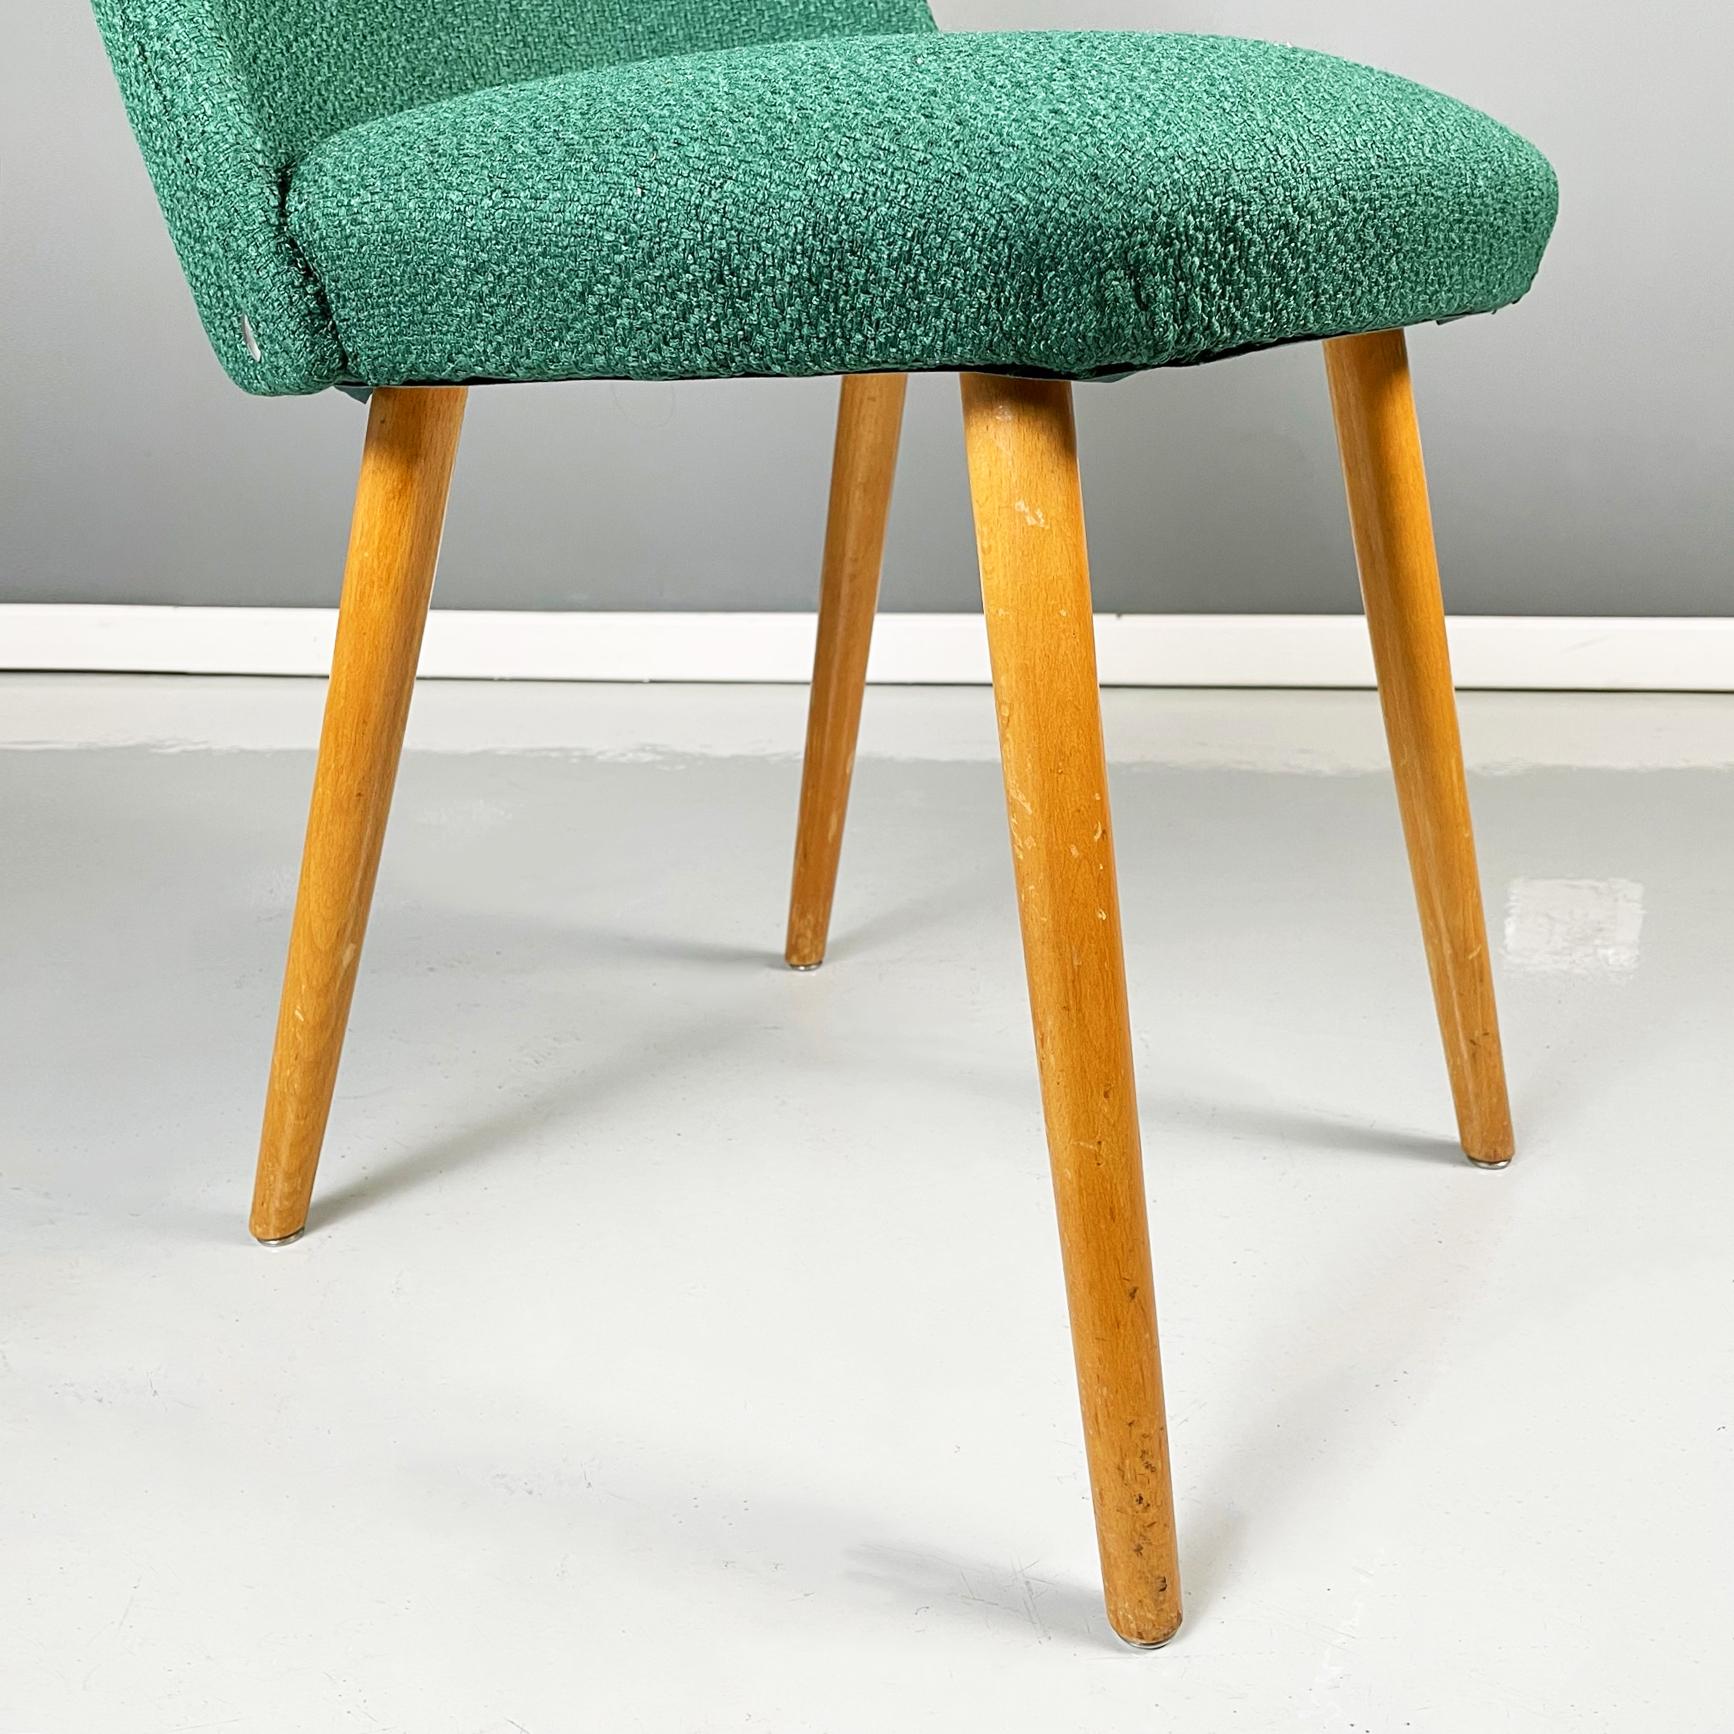 Italian Mid-Century Modern Chairs in Forest Green Fabric and Wood, 1960s For Sale 9